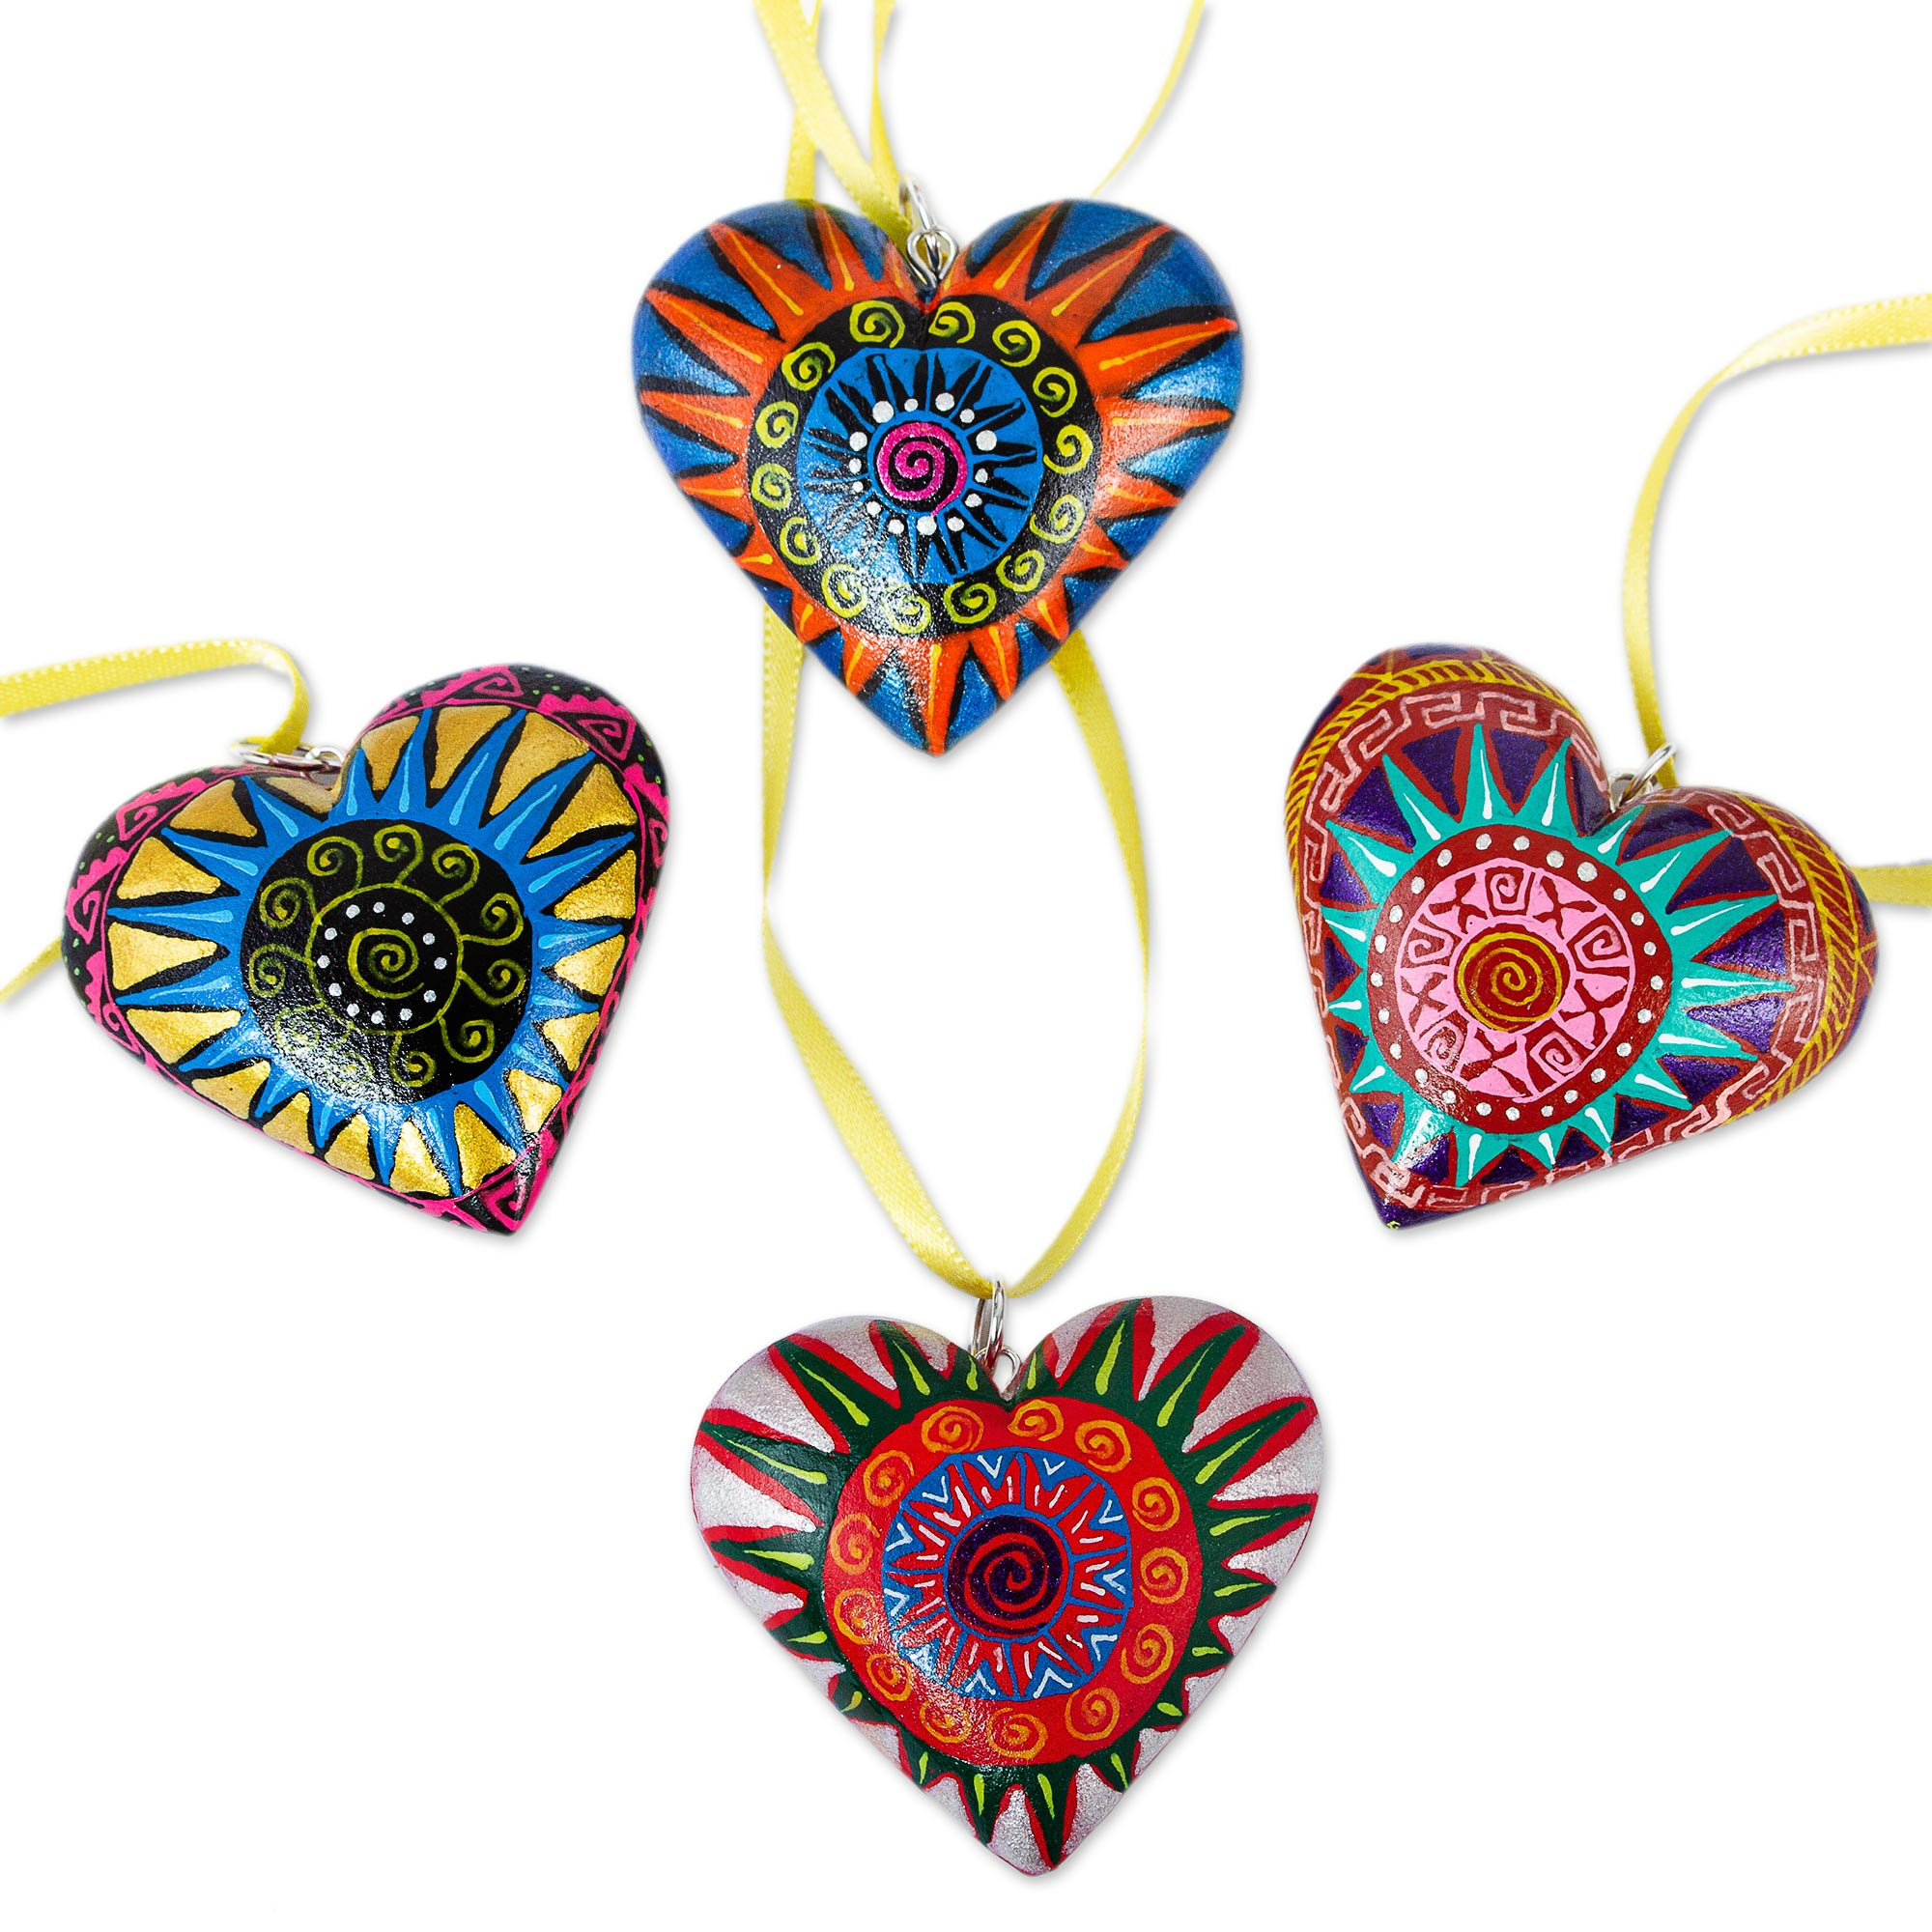 4 Zapotec Hand Painted Colorful Wood Heart Ornaments, 'Zapotec Star Heart